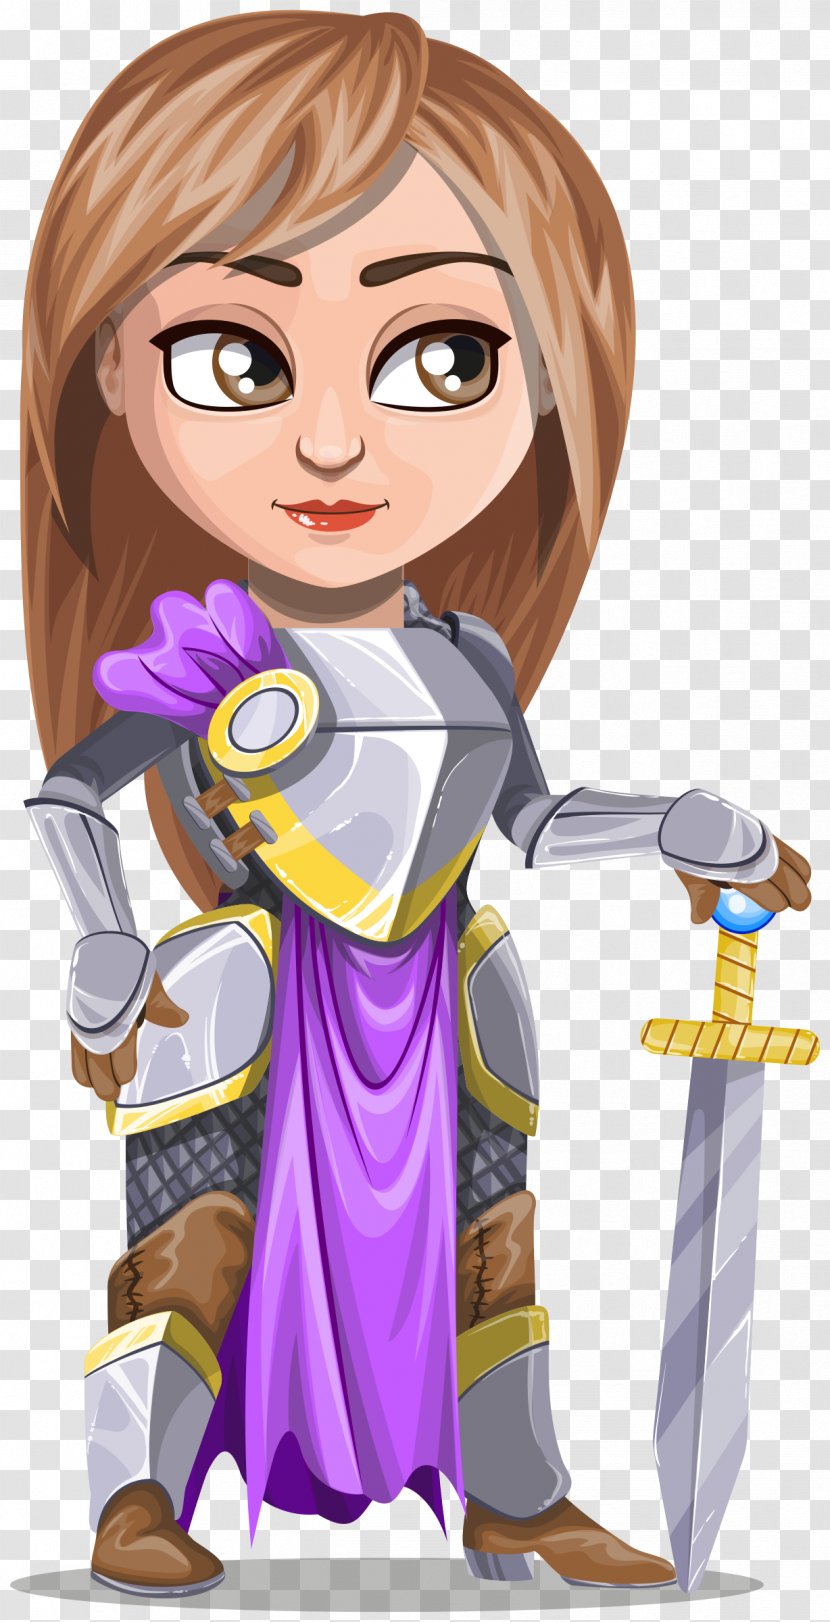 Knight Child Woman Clip Art - Frame Transparent PNG